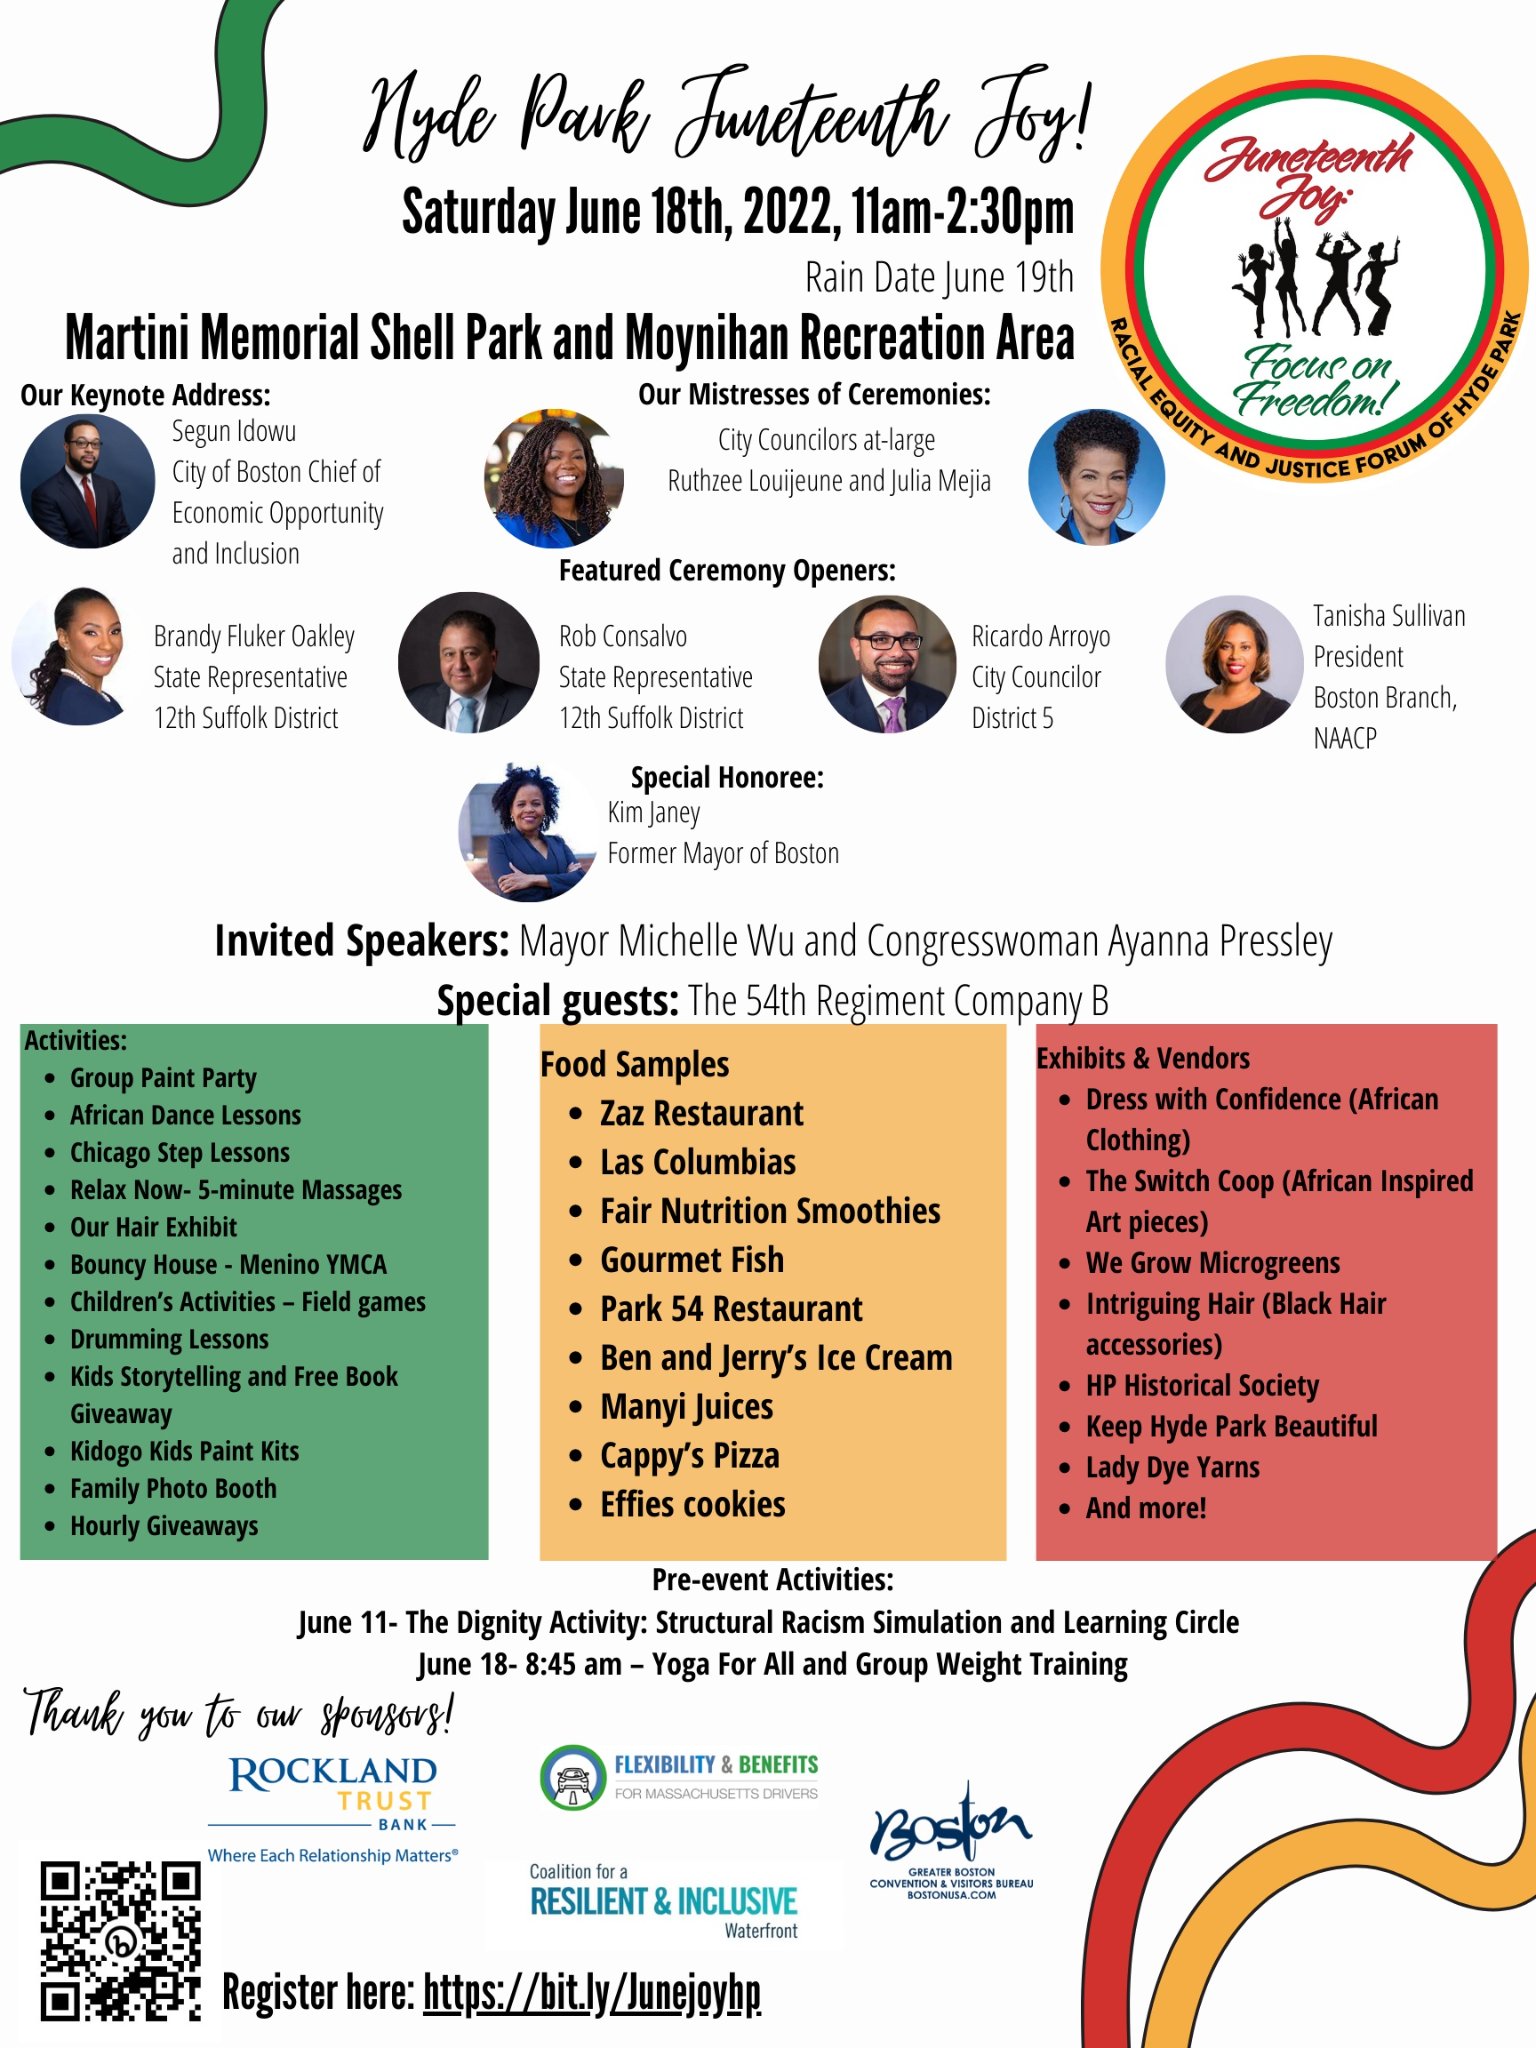 Hyde Park Juneteenth Joy! Saturday, June 18, 2022, 11:00 AM - 2:30 PM Rain date June 19. At the Martini Memorial Shell Park and Moynihan Recreation Area (1015 Truman Parkway, Hyde Park, MA 02136). Keynote address: Segun Idowu, City of Boston Chief of Economic Opportunity and Inclusion Mayoral Address: Michelle Wu, Mayor of Boston Special Honoree: Kim Janey, Former Mayor of Boston Mistresses of Ceremonies: City Councilors Ruthzee Louijeune and Julia Mejia Speaker: Conan Harris, CEO/Founder at Conan Harris & Associates Featured Ceremony Openers:Brandy Fluker Oakley State Representative 12th Suffolk District Rob Consalvo State Representative 12th Suffolk District Ricardo Arroyo City Councilor District 5 Tanisha Sullivan President Boston Branch, NAACP Invited Speaker: Congresswoman Ayanna Pressley Special guests: The 54th Regiment Company B Activities: • Group Paint Party • African Dance Lessons • Chicago Step Lessons • Relax Now- 5-minute Massages • Bouncy House - Menino YMCA • Children's Activities - Field games • Drumming Lessons • Kids Storytelling and Free Book Giveaway • Kidogo Kids Paint Kits • Family Photo Booth • Hourly Giveaways • Roosevelt School Student performances Food Samples from: • Zaz Restaurant • Las Columbias • Fair Nutrition Smoothies • Gourmet Fish • Park 54 Restaurant • Ben and Jerry's Ice Cream • Manyi Juices • Cappy's Pizza • Effies cookies • Shaws Supermarket Exhibits & Vendors • Dress with Confidence (African  Clothing) • The Switch Coop (African Inspired Art  pieces) • We Grow Microgreens • Intriguing Hair (Black Hair accessories) • HP Historical Society • Keep Hyde Park Beautiful • Lady Dye Yarns • My Crown Speaks Exhibit/Sales • And more! Free Swag Bags! Pre-event Activities: June 18- 8:45 am – Yoga For All and Group Weight Training Register here: https://bit.ly/Junejoyhp Sponsored by: Rockland Trust Bank Boston Mayor's Office of Arts and Culture   Needham Bank Coalition for a Resilient and Inclusive Waterfron Department of Conservation and Recreation (DCR) Insight Realty Group New England Aquarium Greater Boston Convention and Visitors Bureau LeadvantEDGE (This may not be a complete list of sponsors!) This program is supported in part by a grant from the Mayor's Office of Arts and Culture and the City of Boston.